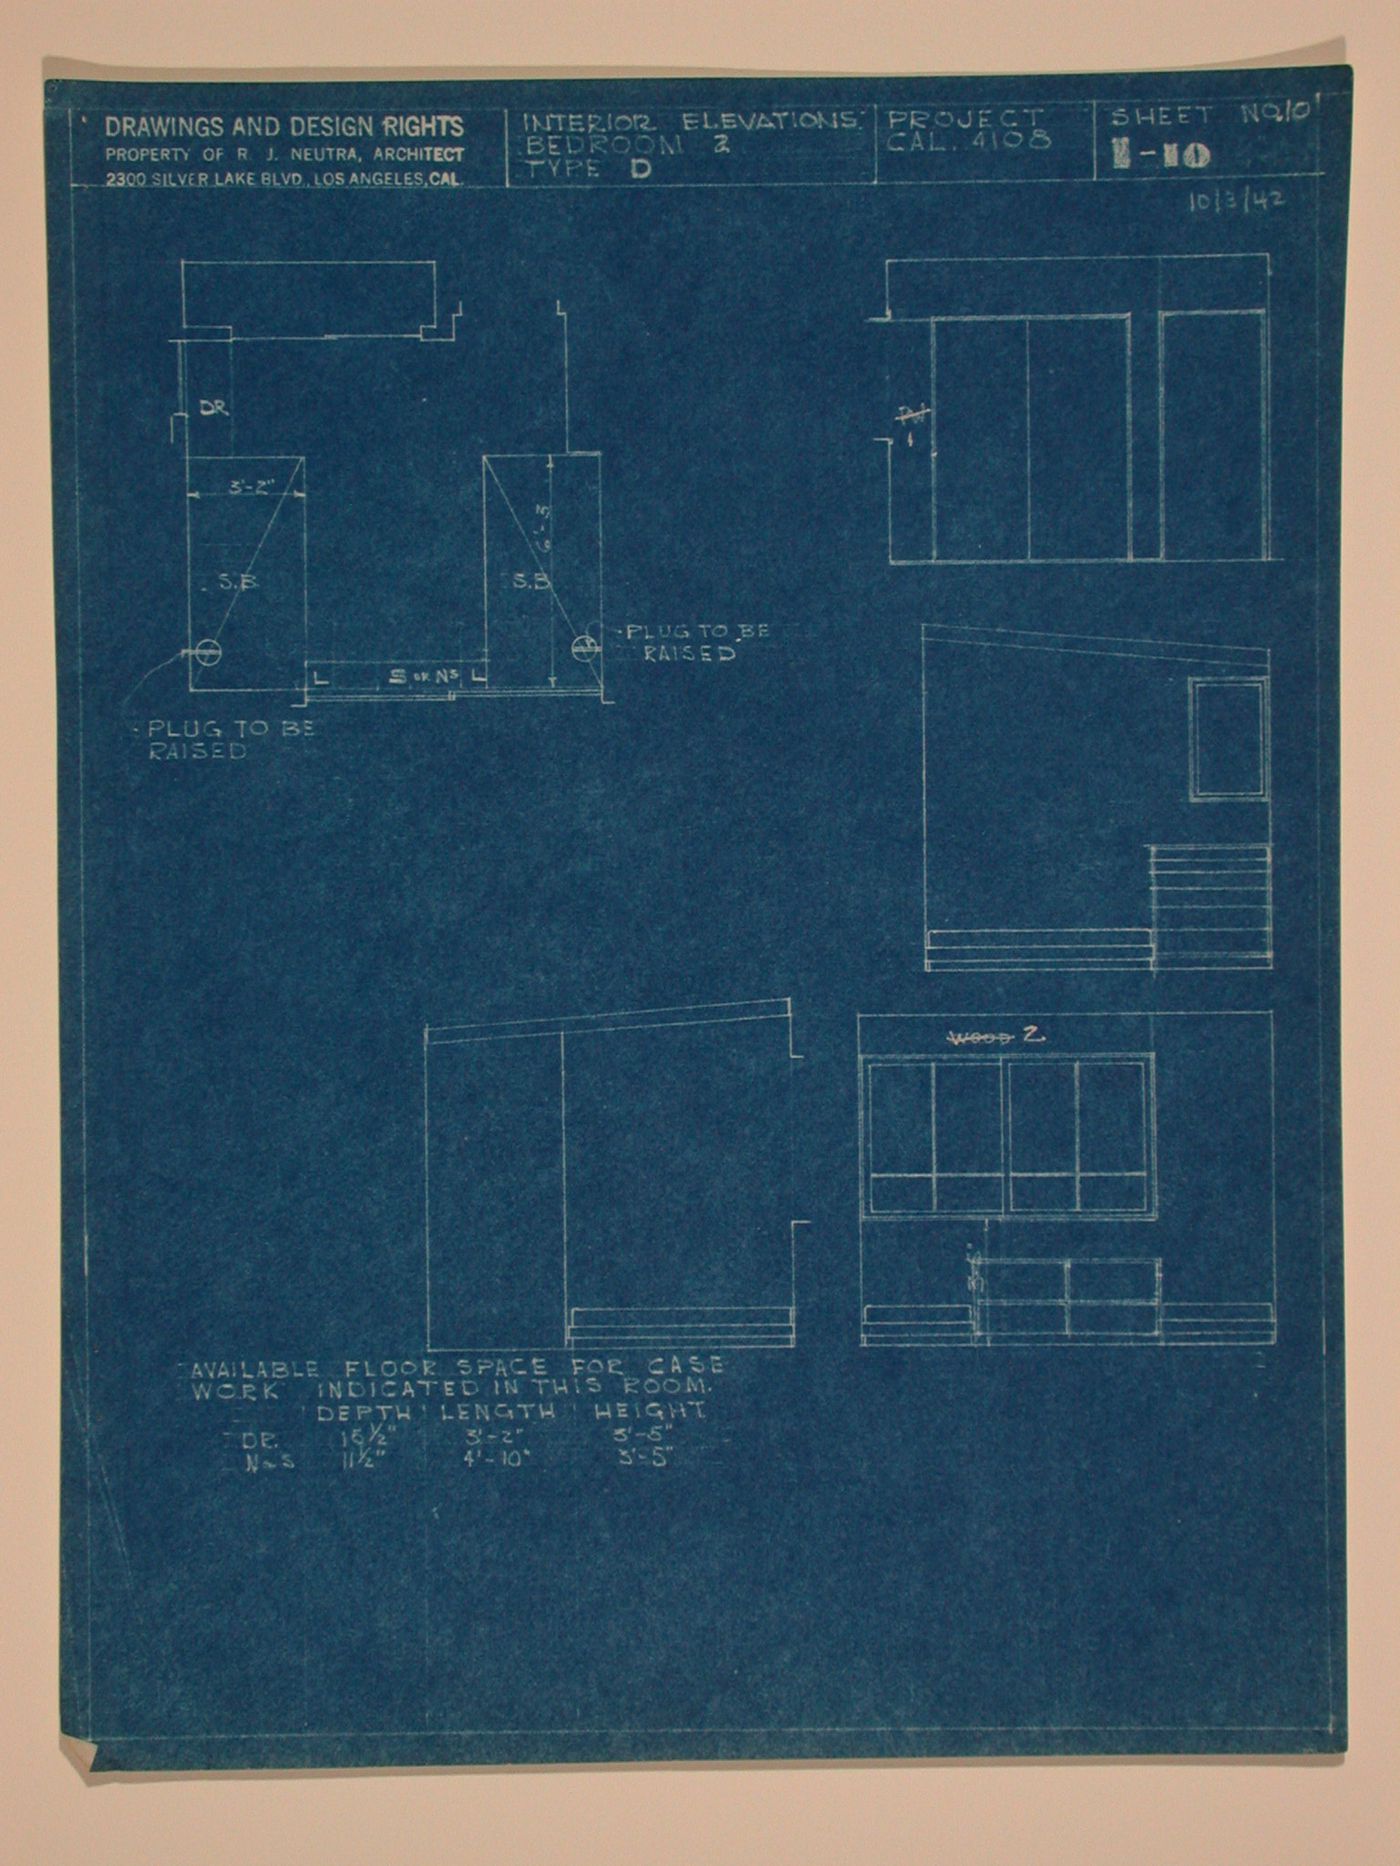 Interior elevations and plan for bedroom no. 2 type "D"